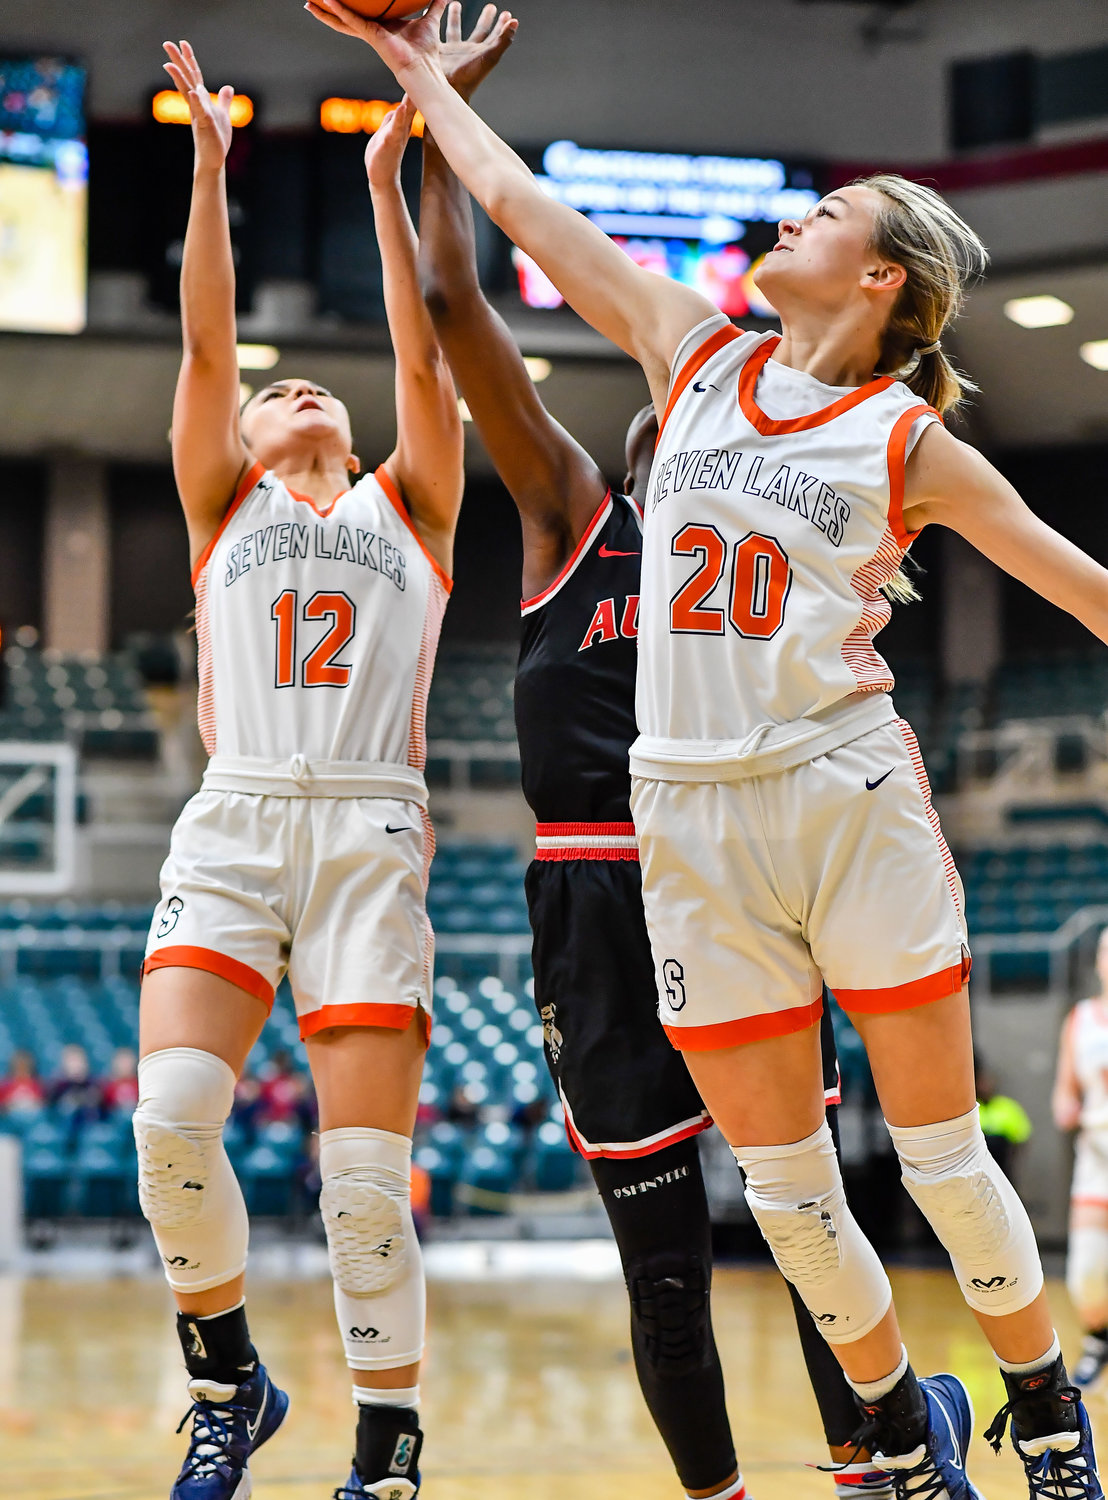 Katy Tx. Feb 22, 2022:  Seven Lakes Summer Halphen #20, Seven Lakes Cailyn Tucker #12 and a Fort Bend Austins player battle for the rebound during the Regional Quarterfinal playoff game, Seven Lakes vs Fort Bend Austin at the Merrell Center. (Photo by Mark Goodman / Katy Times)